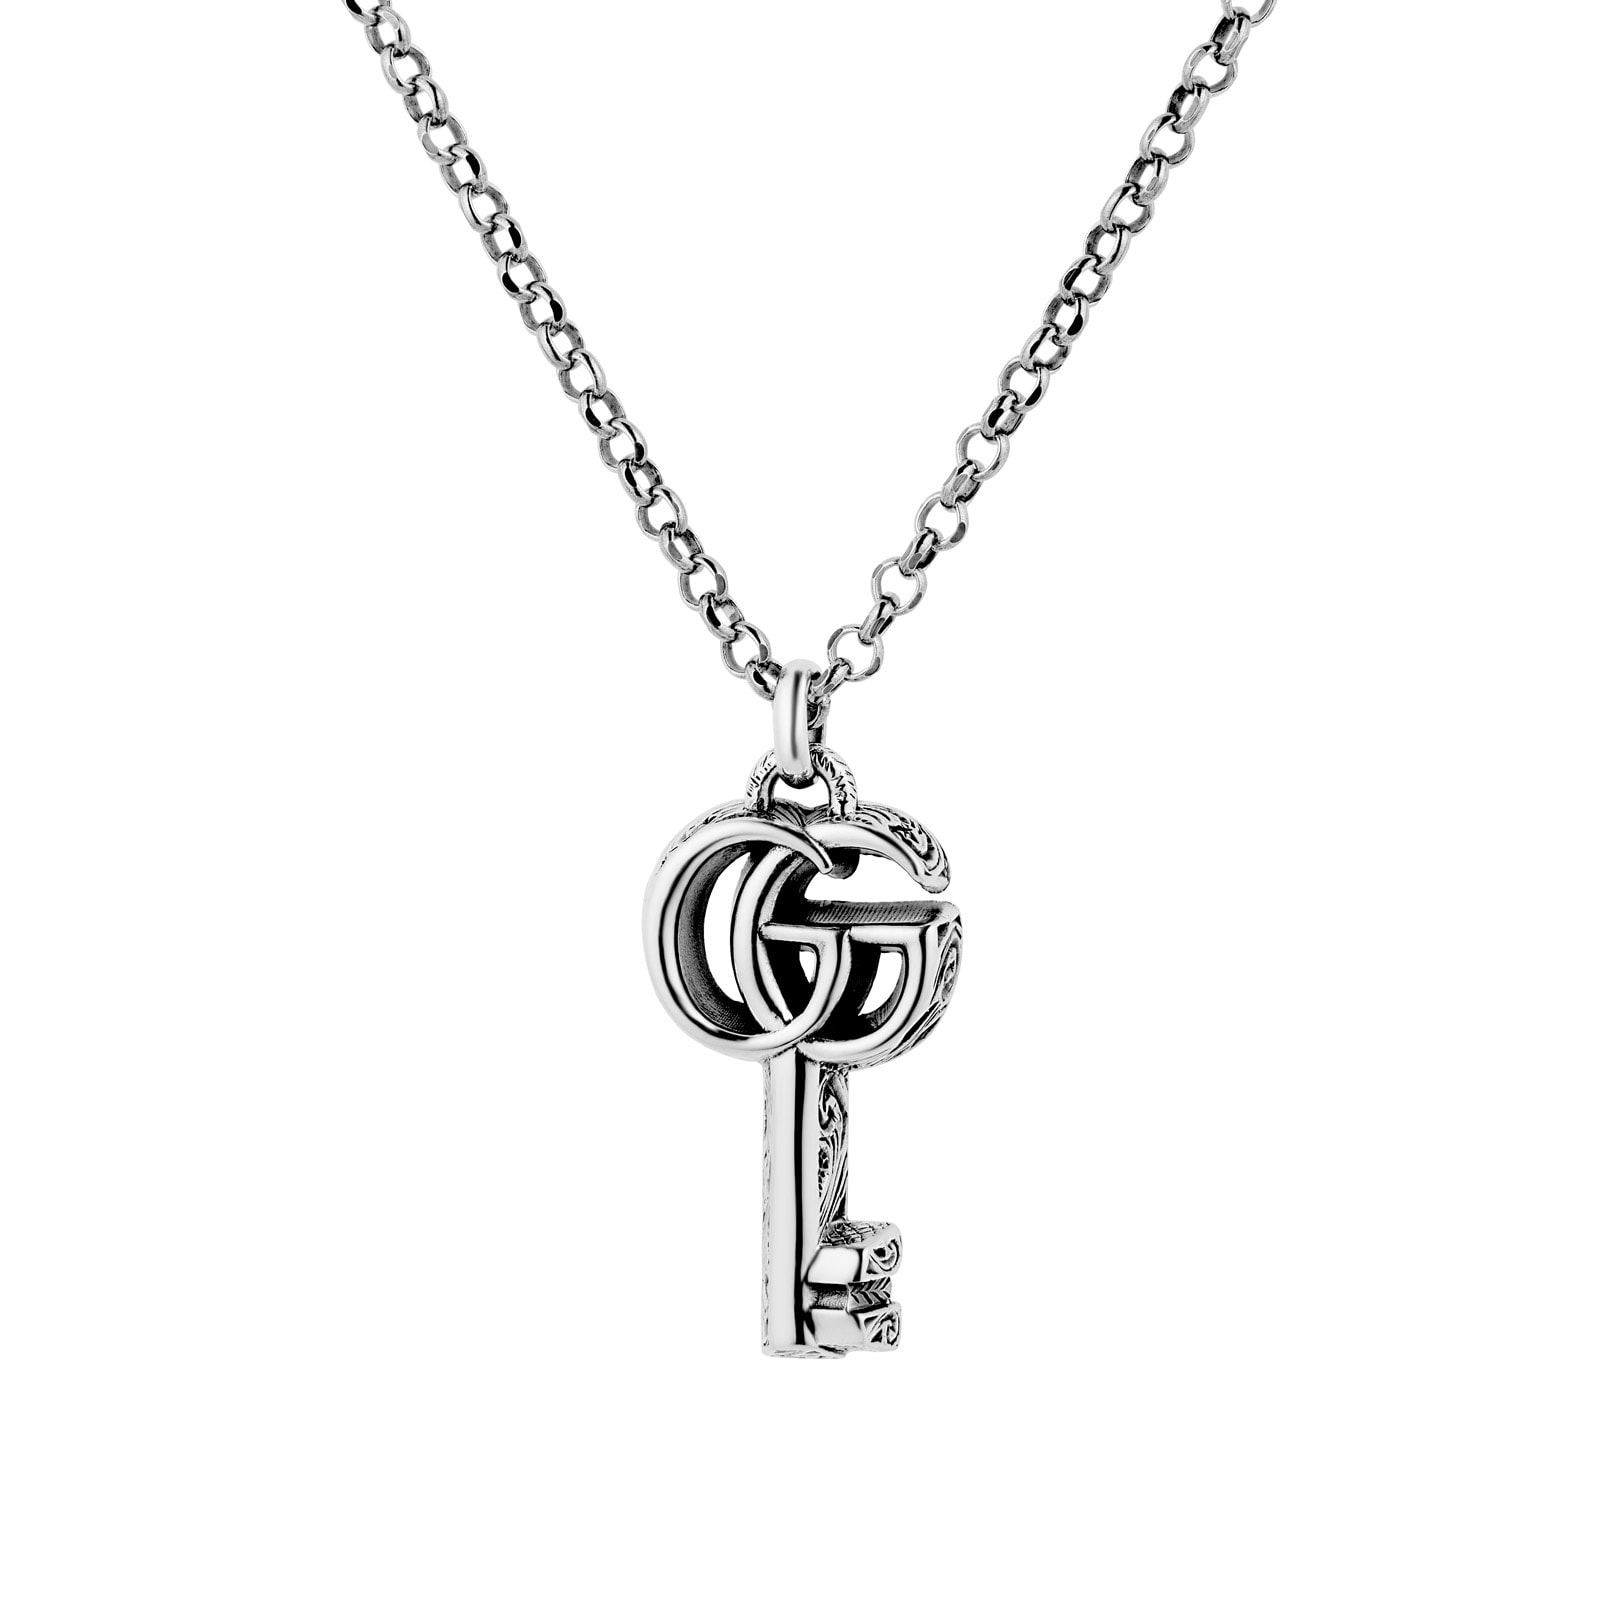 GUCCI Silver GG Marmont Key Necklace - Goldsmiths